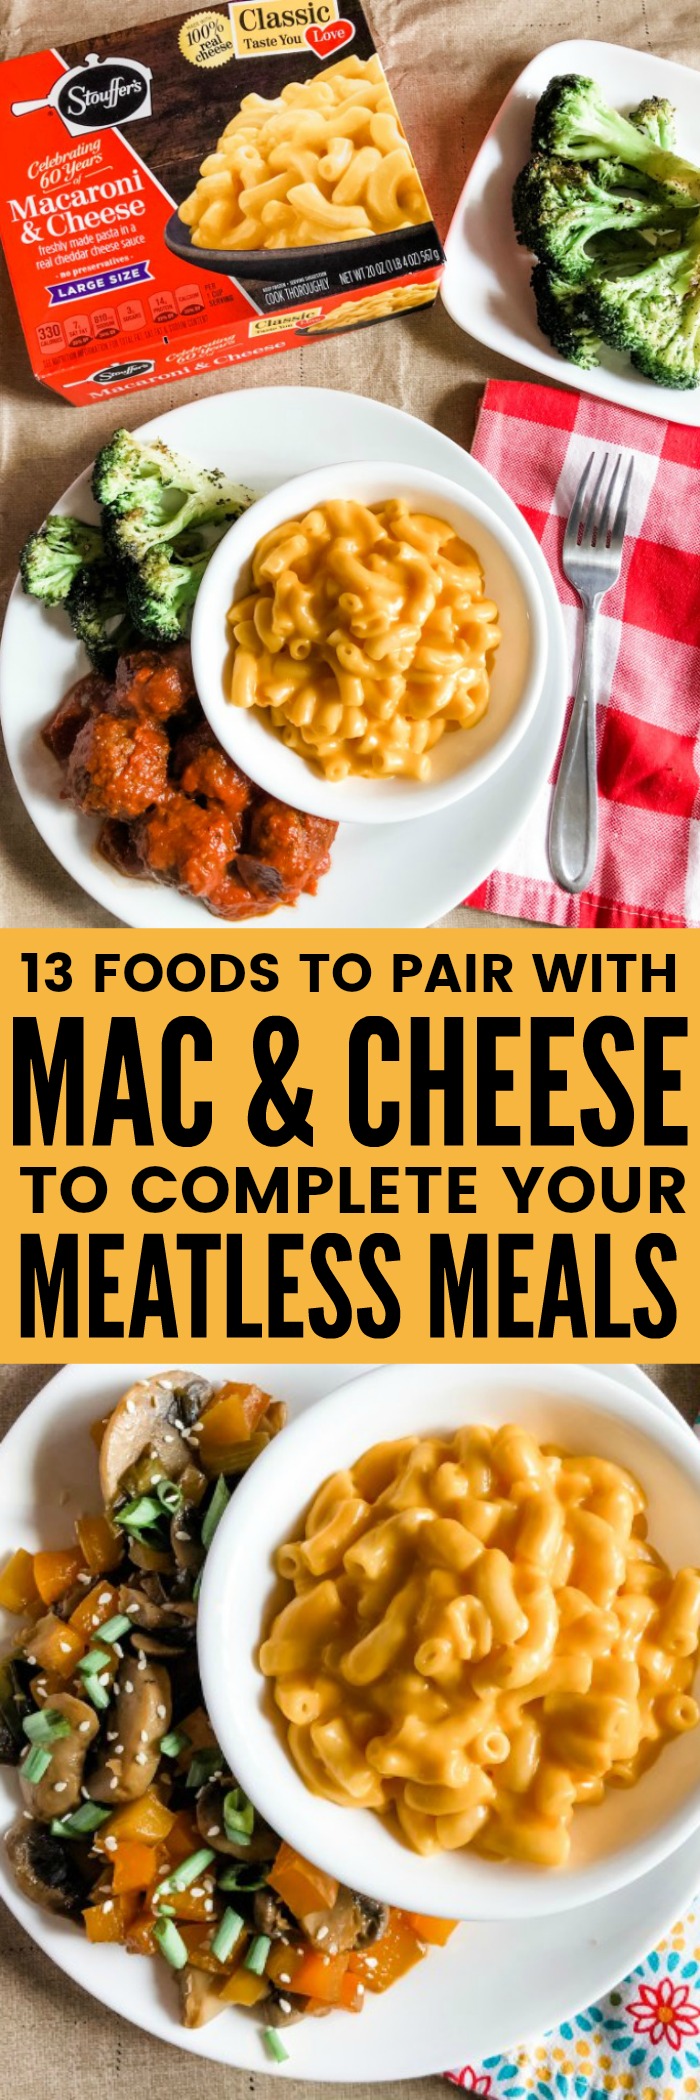 13 Foods to Pair with Mac & Cheese for Meatless Meals